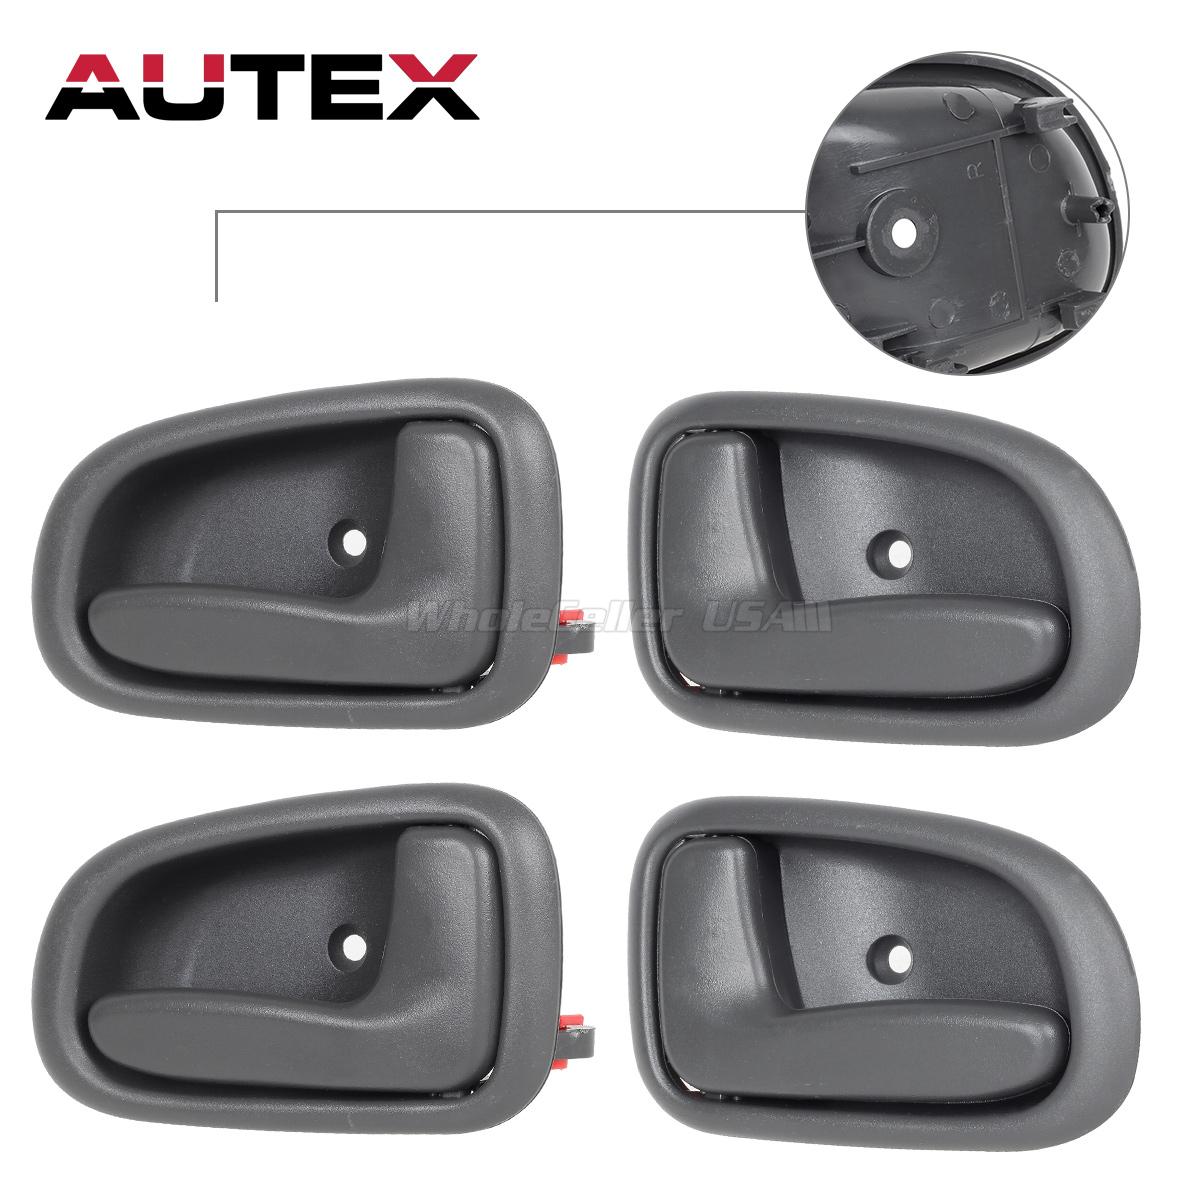 Details About 4 Interior Left Right Gray Door Handle For 93 97 Toyota Corolla